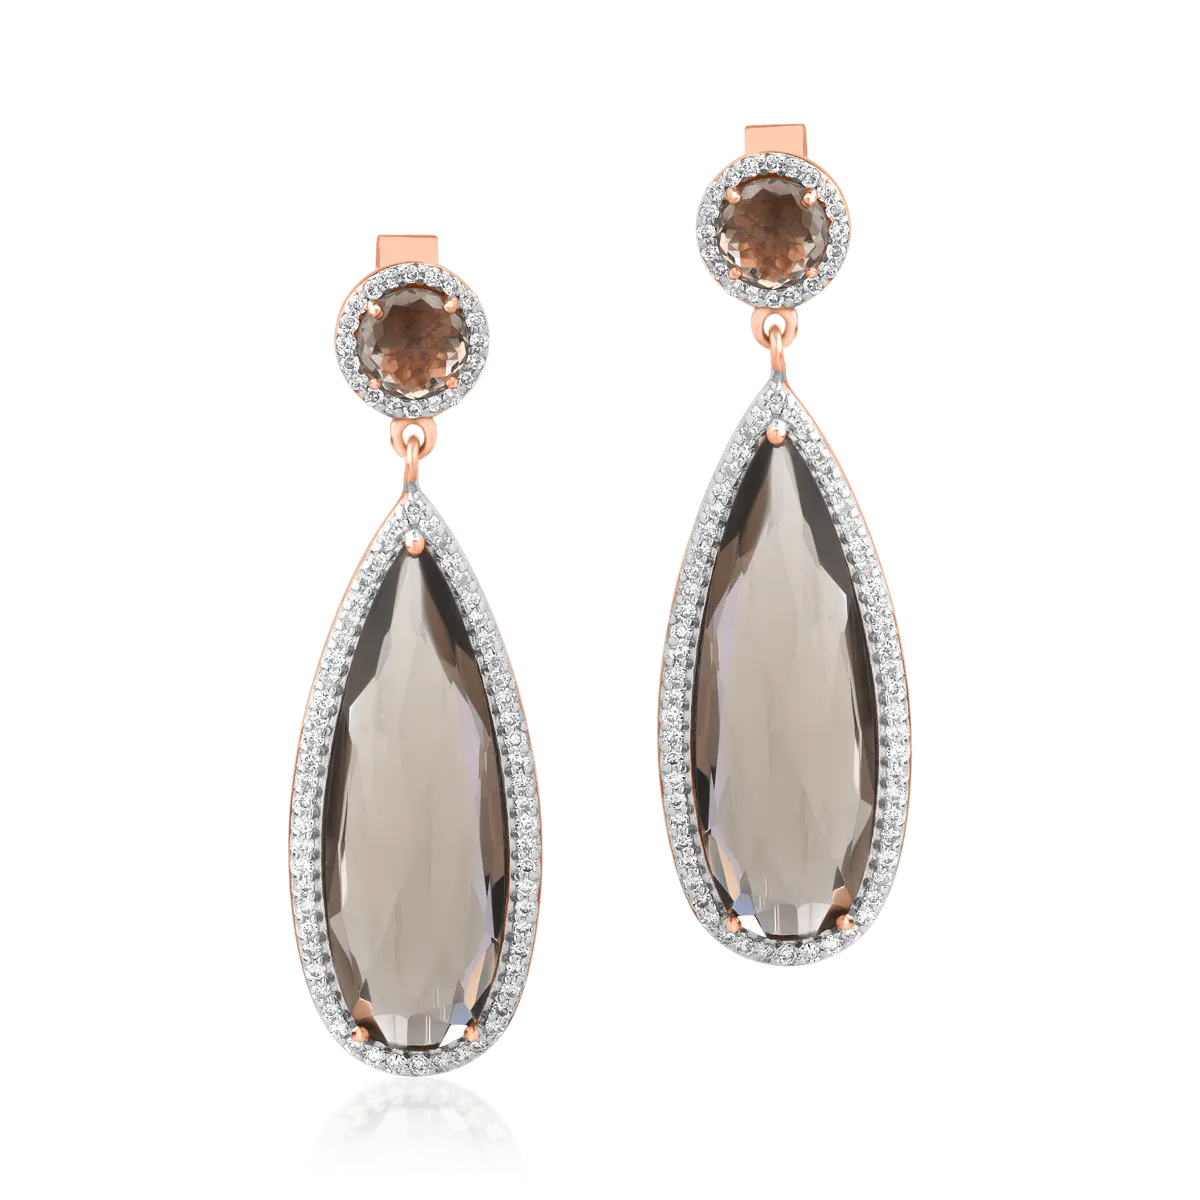 14K rose gold earrings with 12.38ct smoky quartz and 0.585ct diamonds